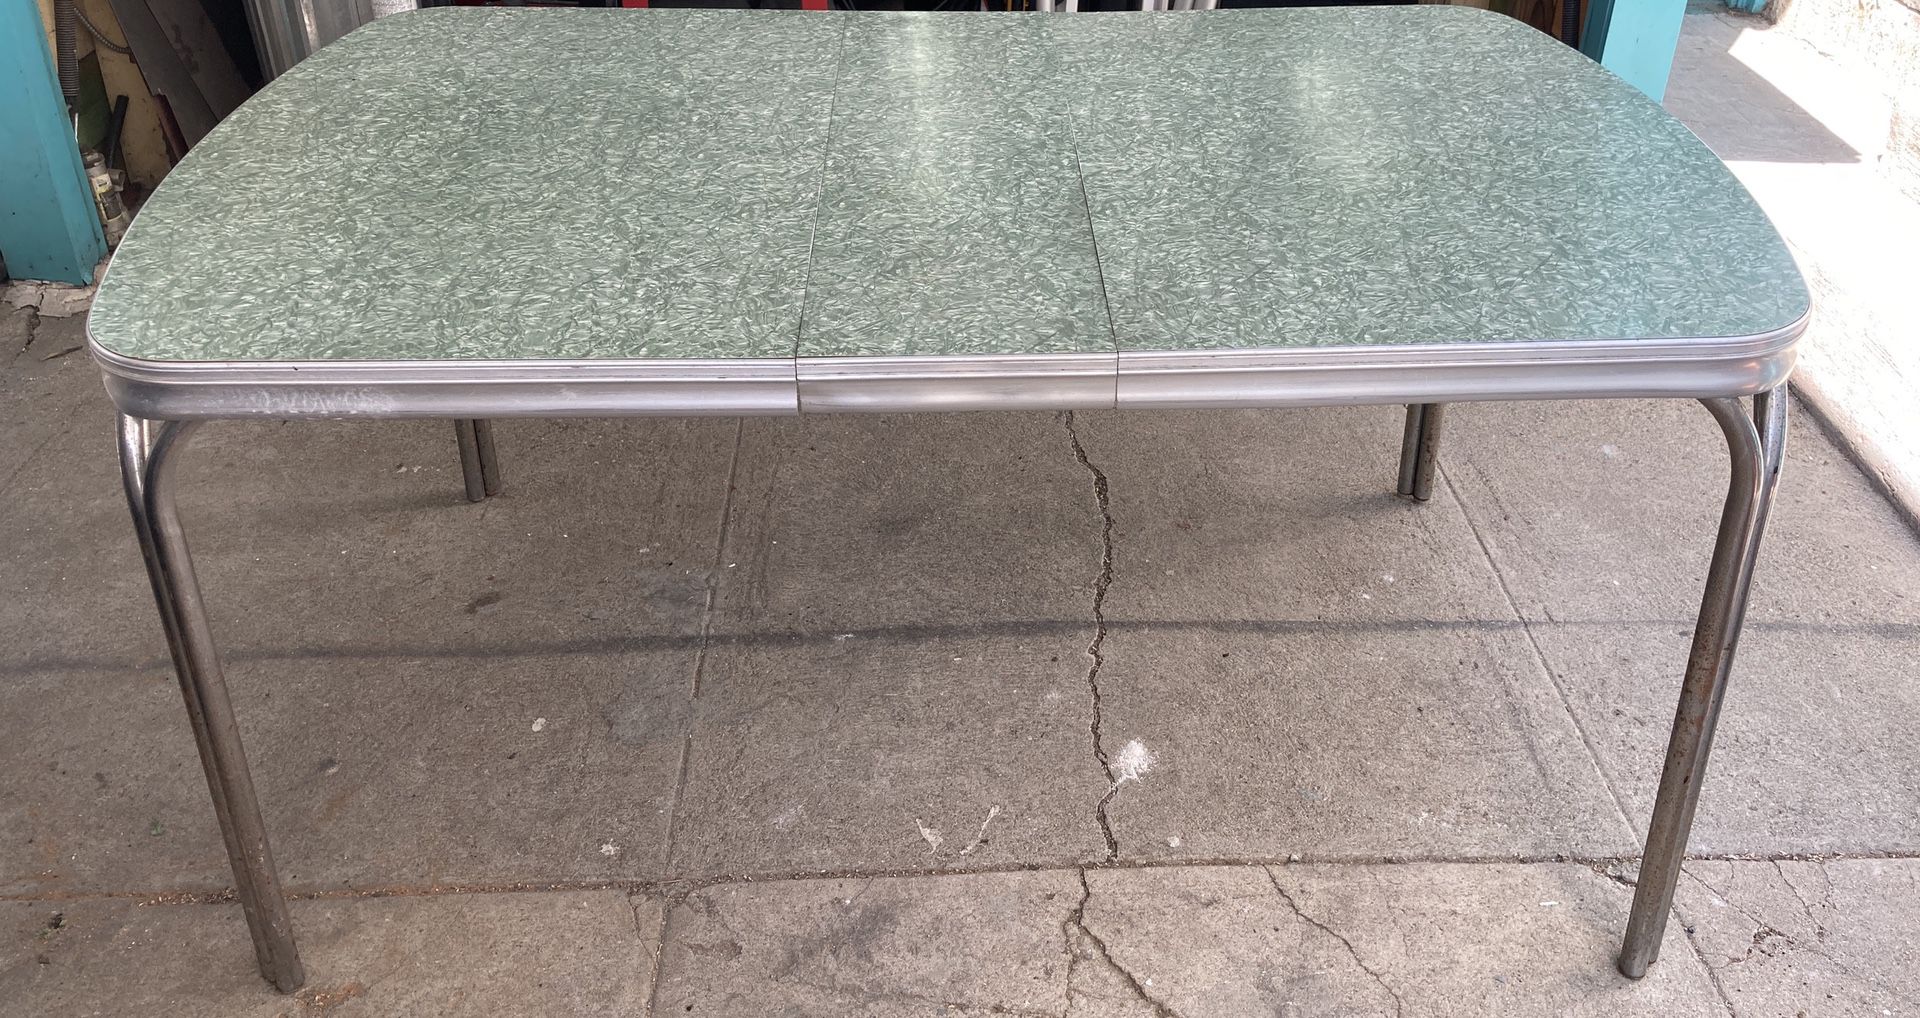 1950’s Sage Green and White Formica Kitchen or Dining Rectangle Table with Removable Leaf